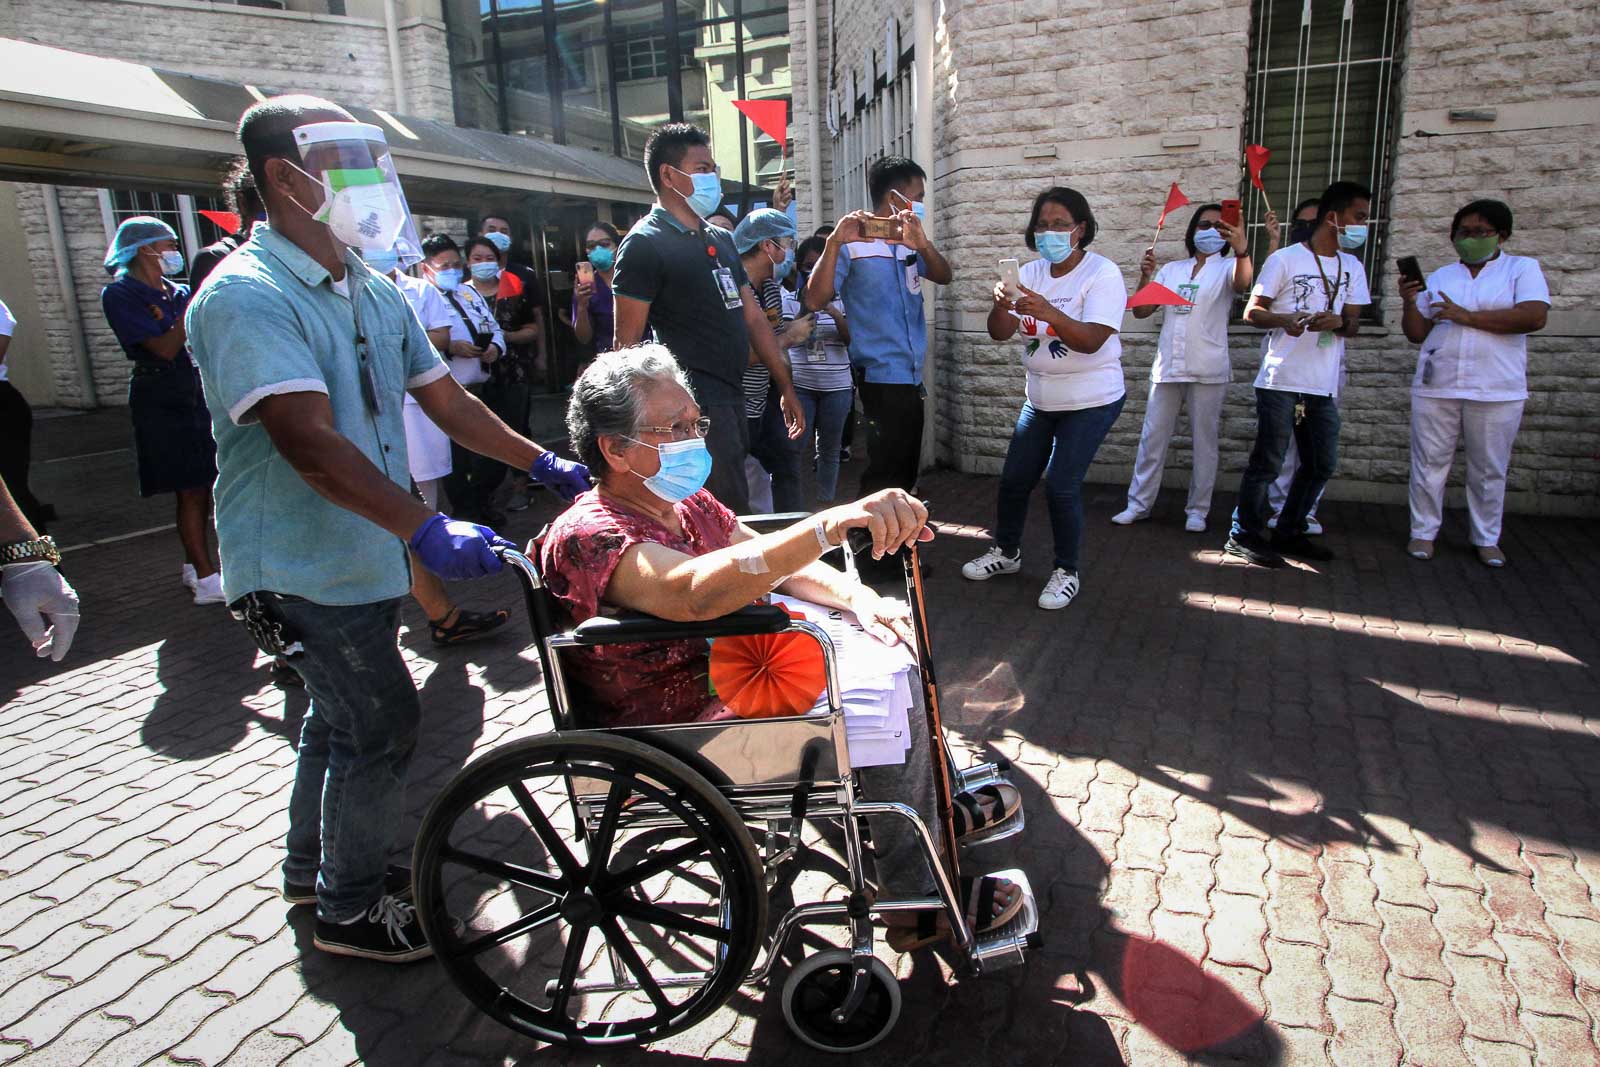 RECOVERY. Health workers greet a patient being wheeled out of the Vicente Sotto Memorial Medical Center (VSMMC) in Cebu City, Philippines on April 24, 2020, after recovering from COVID-19. Photo by Gelo Litonjua/Rappler 